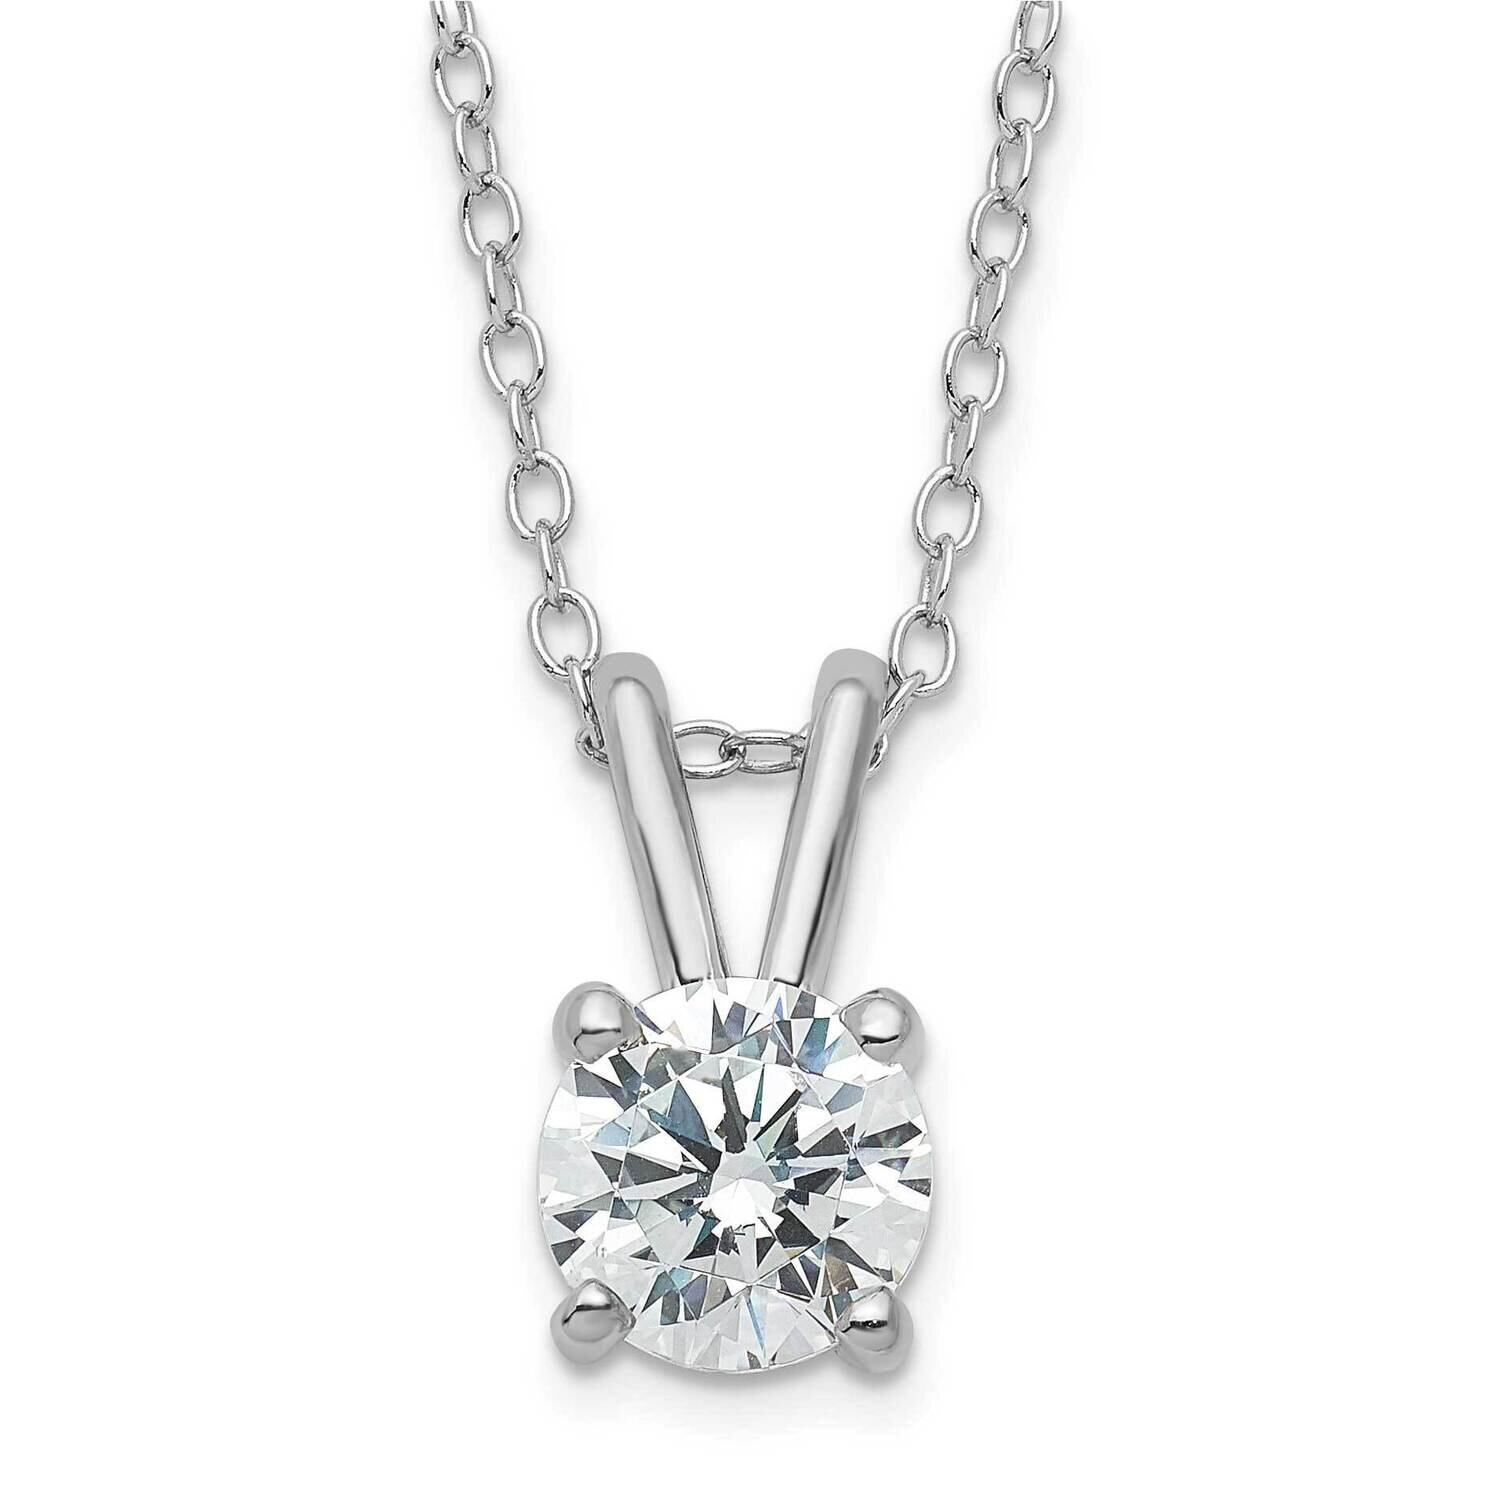 Diamonore 6.5mm Solitare Necklace Sterling Silver Rhodium-plated PXS2733/DAWT-SSDM